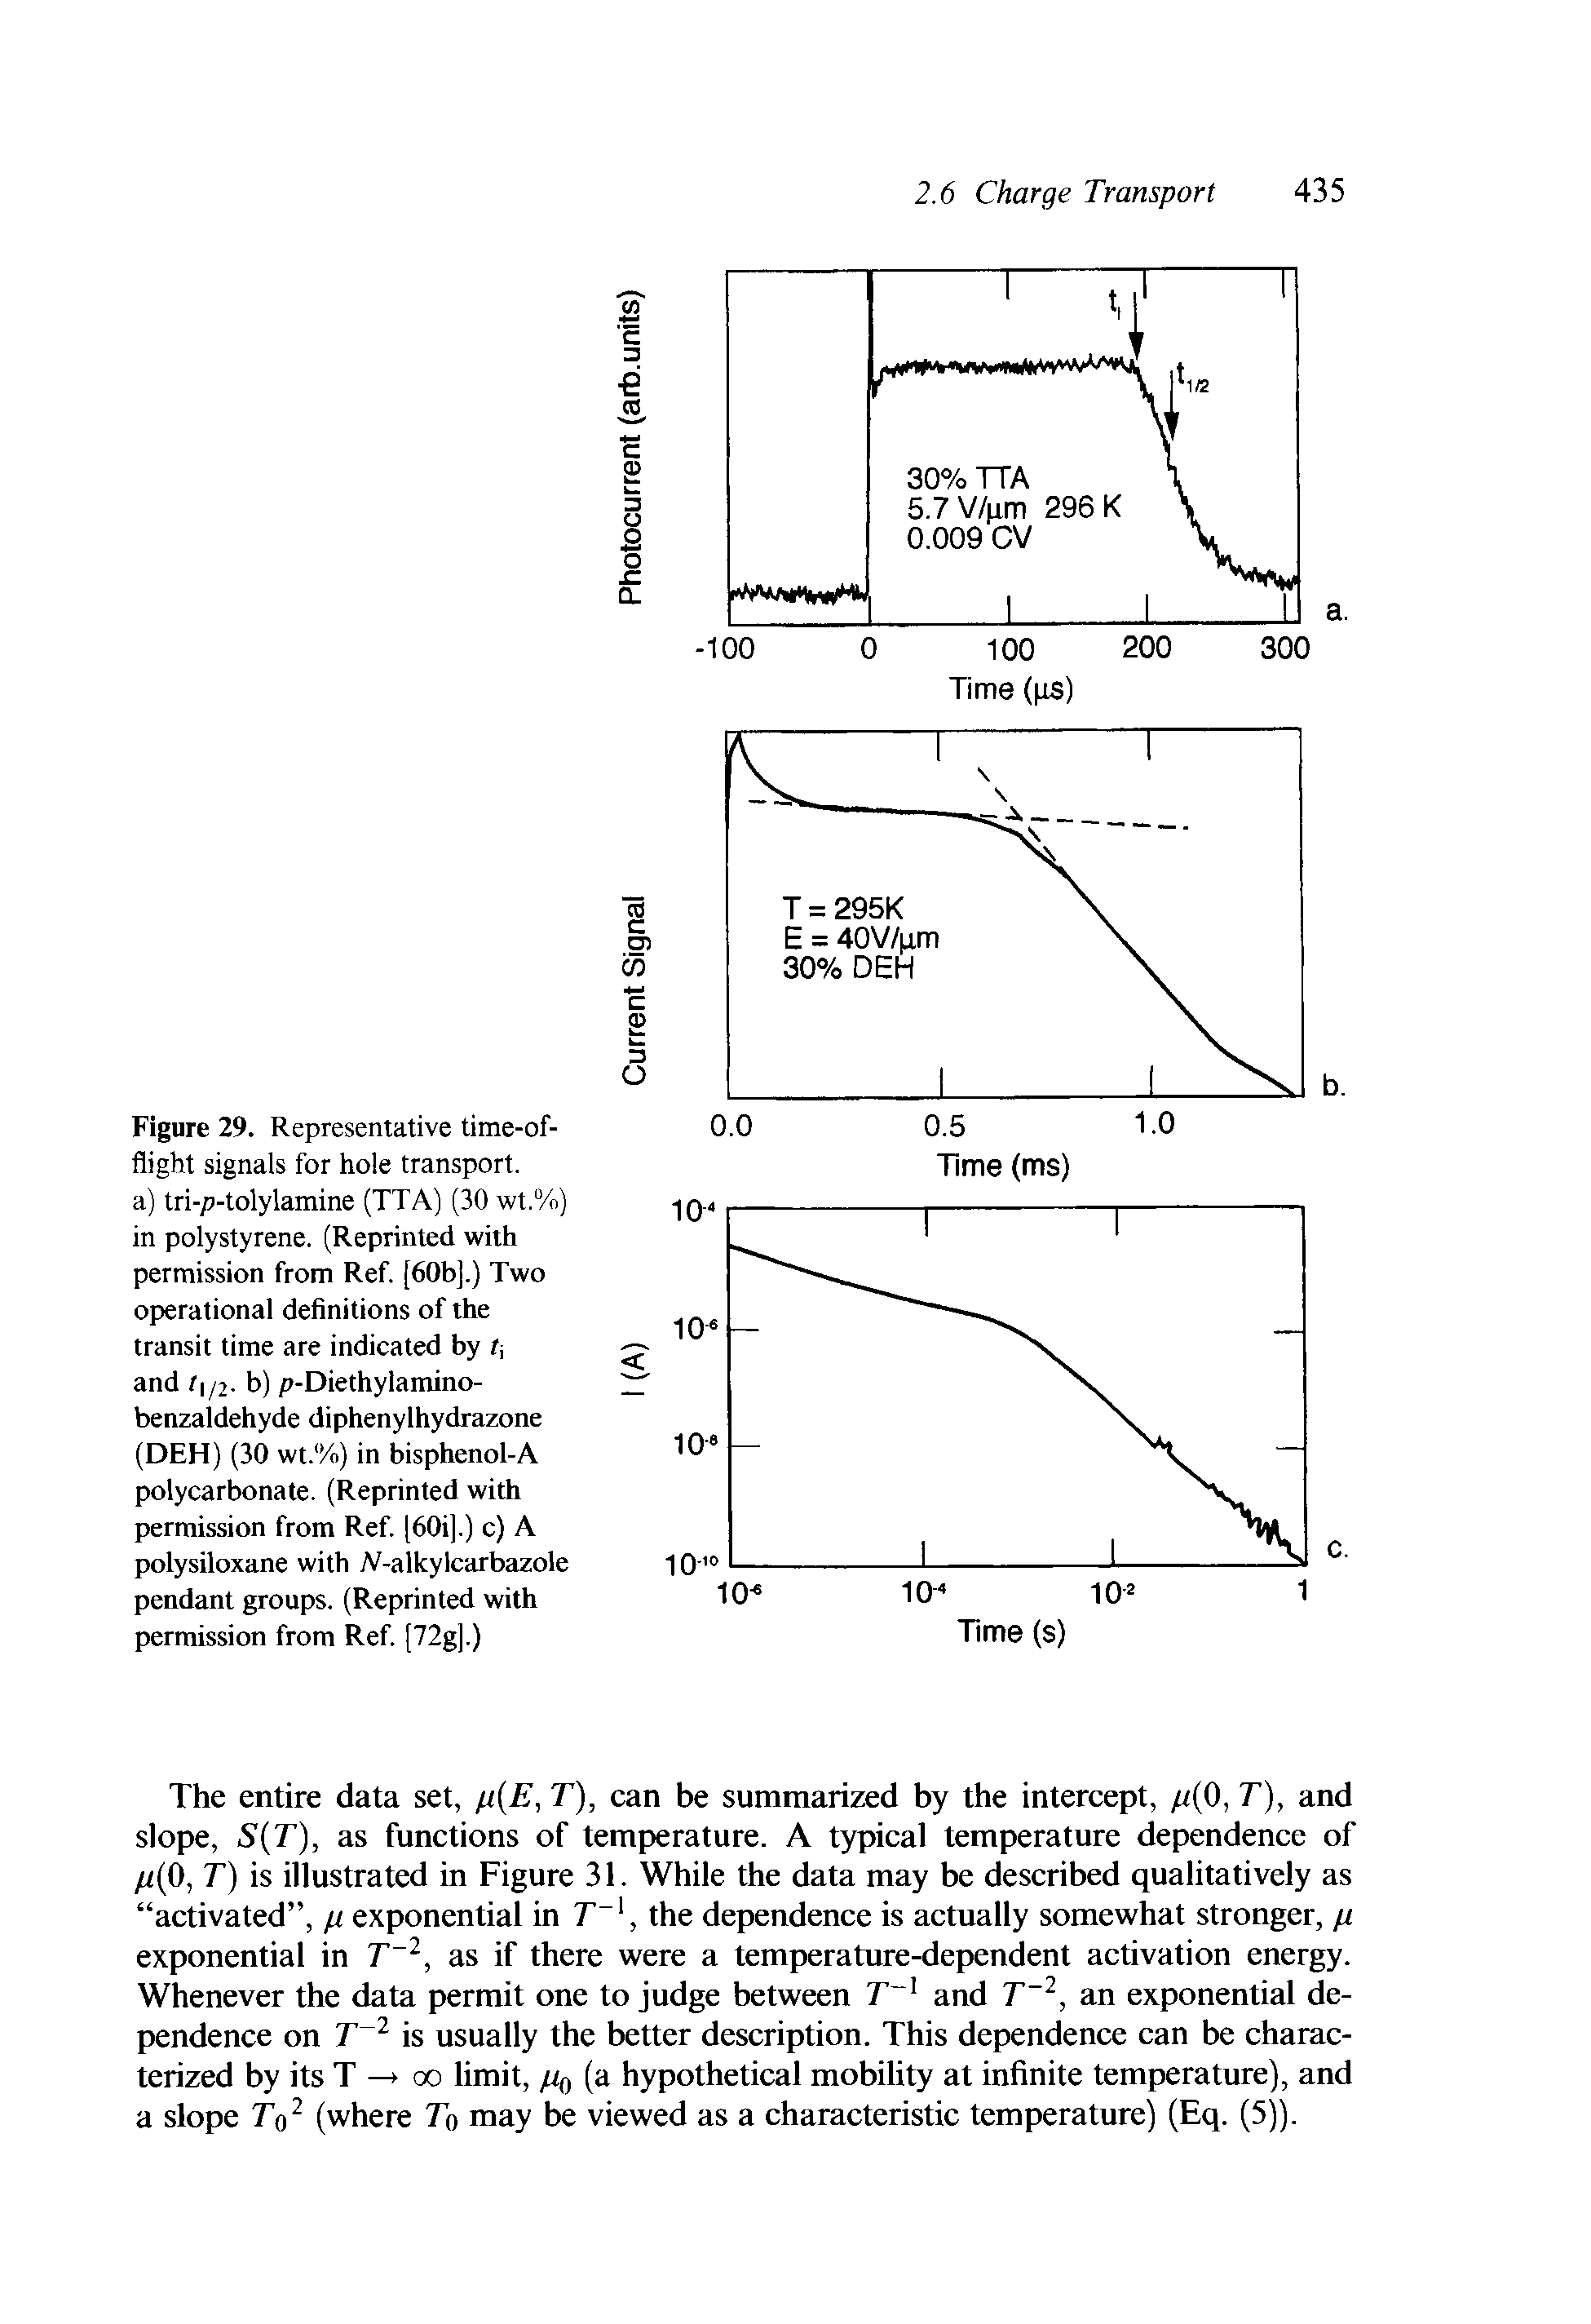 Figure 29. Representative time-of-flight signals for hole transport, a) tri-p-tolylamine (TTA) (30 wt.%) in polystyrene. (Reprinted with permission from Ref. [60b].) Two operational definitions of the transit time are indicated by t, and t /2. b) p-Diethylamino-benzaldehyde diphenylhydrazone (DEH) (30 wt. /o) in bisphenol-A polycarbonate. (Reprinted with permission from Ref. [60i].) c) A polysiloxane with A-alkylcarbazole pendant groups. (Reprinted with permission from Ref. [72g].)...